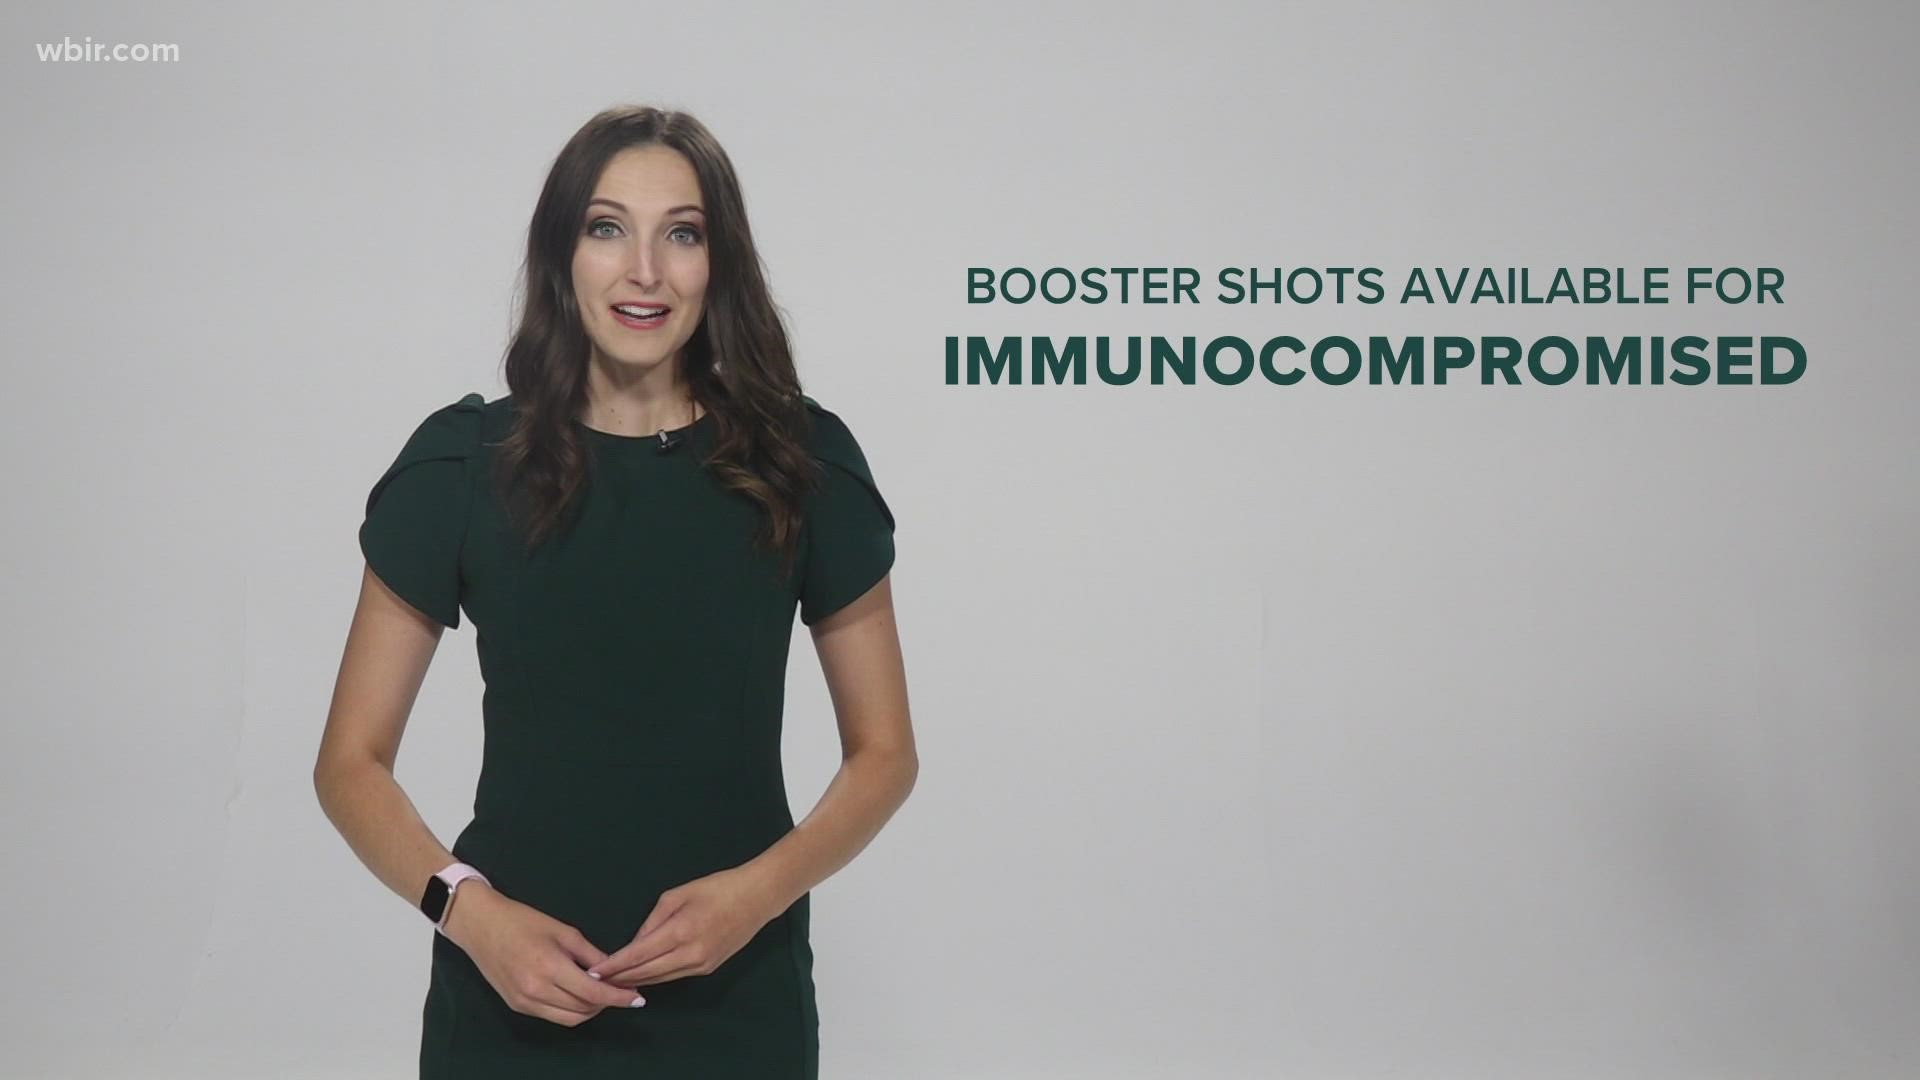 Right now, booster shots are only available for those who received the Pfizer and Moderna vaccine.